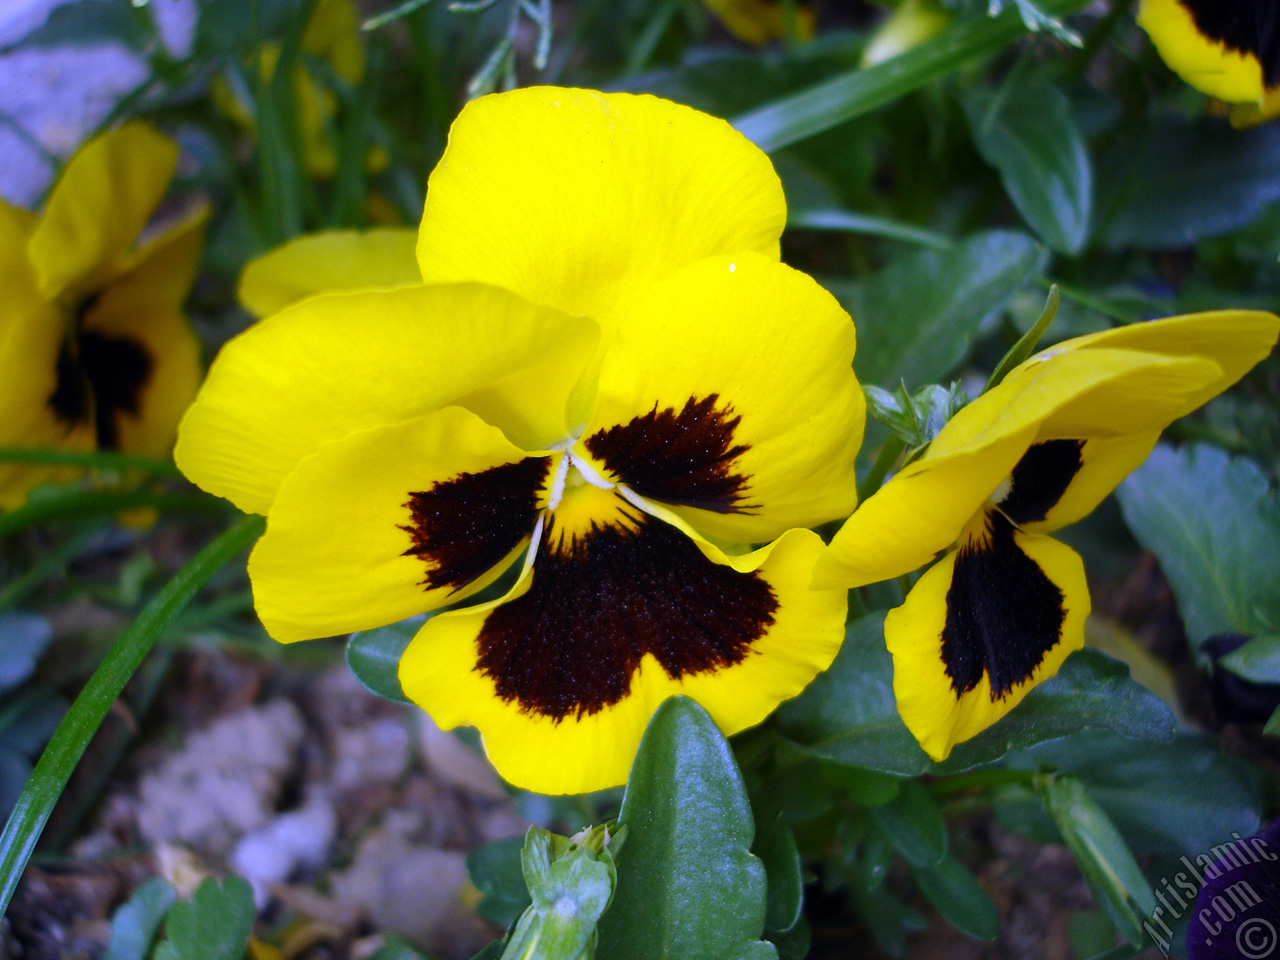 Yellow color Viola Tricolor -Heartsease, Pansy, Multicoloured Violet, Johnny Jump Up- flower.
